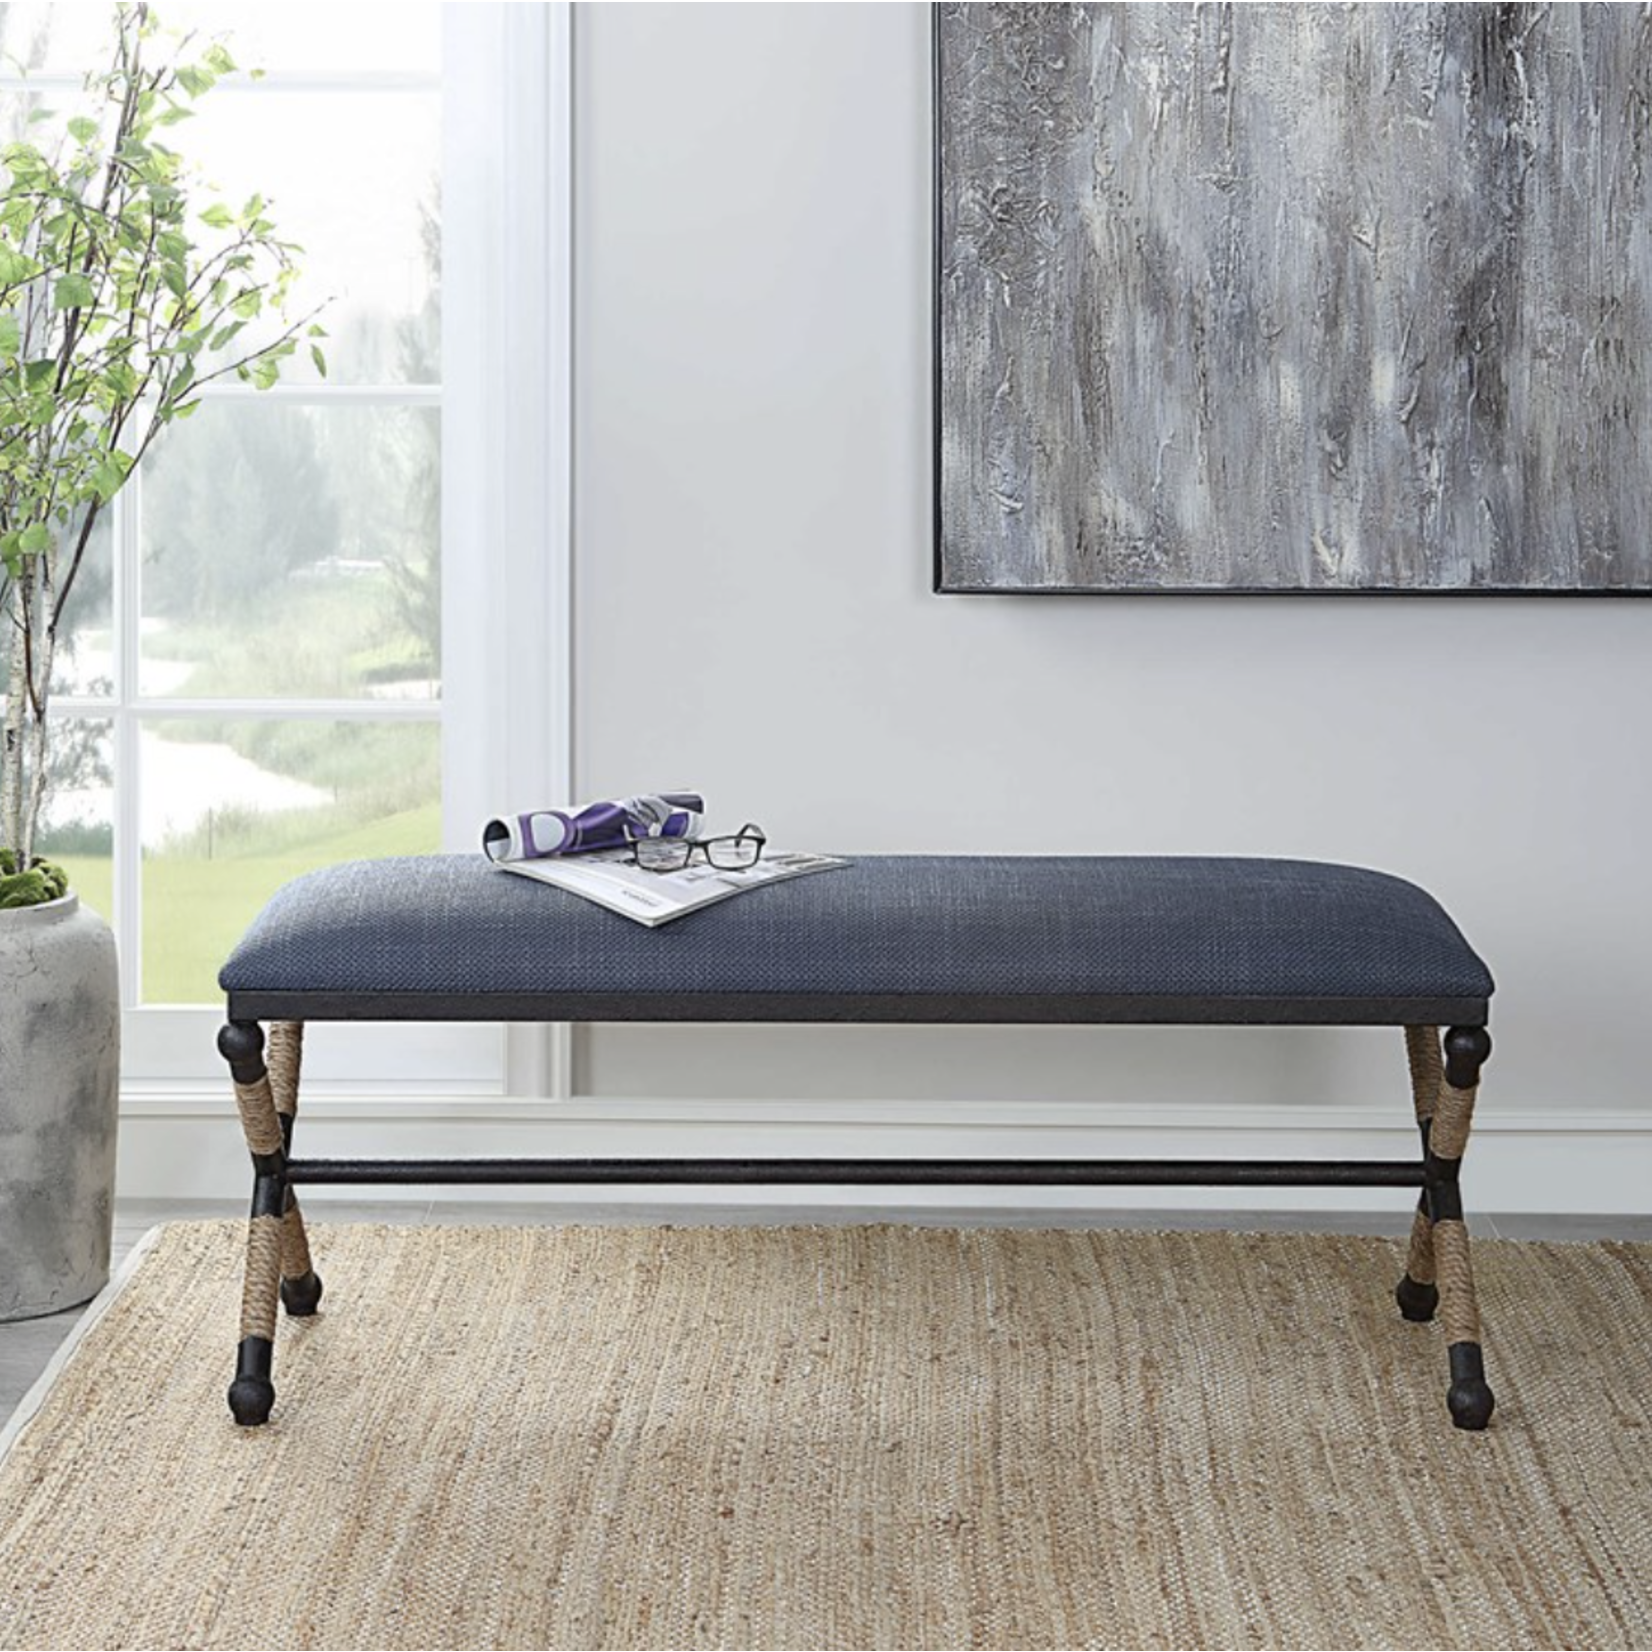 Outside The Box 48x16x21 Firth Rustic Navy Bench